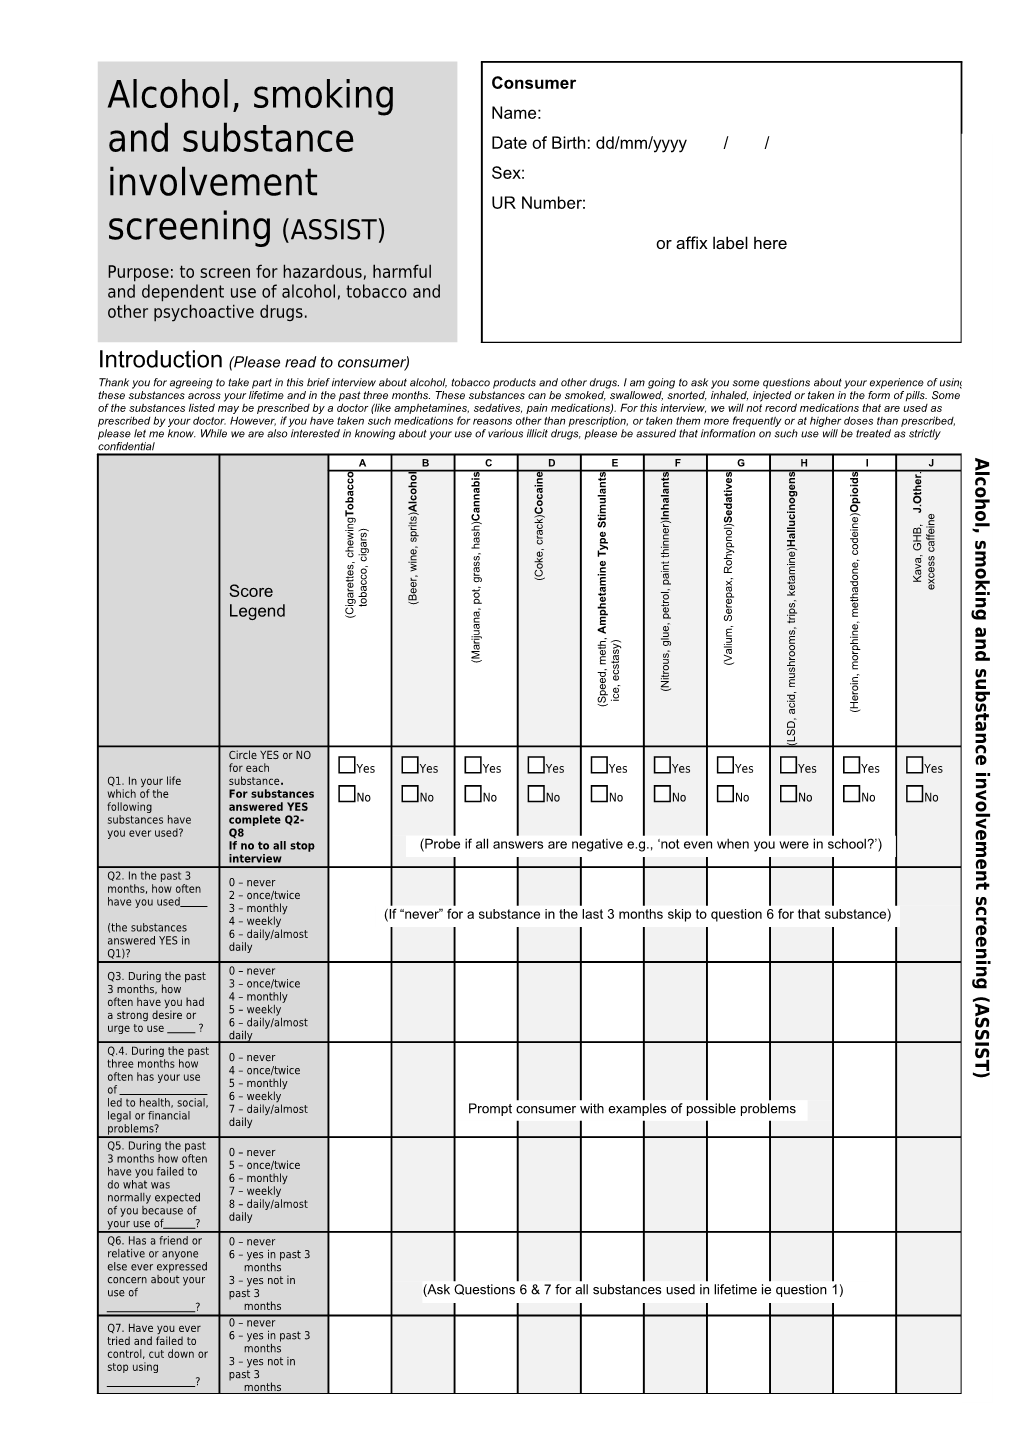 Alcohol, Smoking and Substance Involvement Screening (ASSIST)